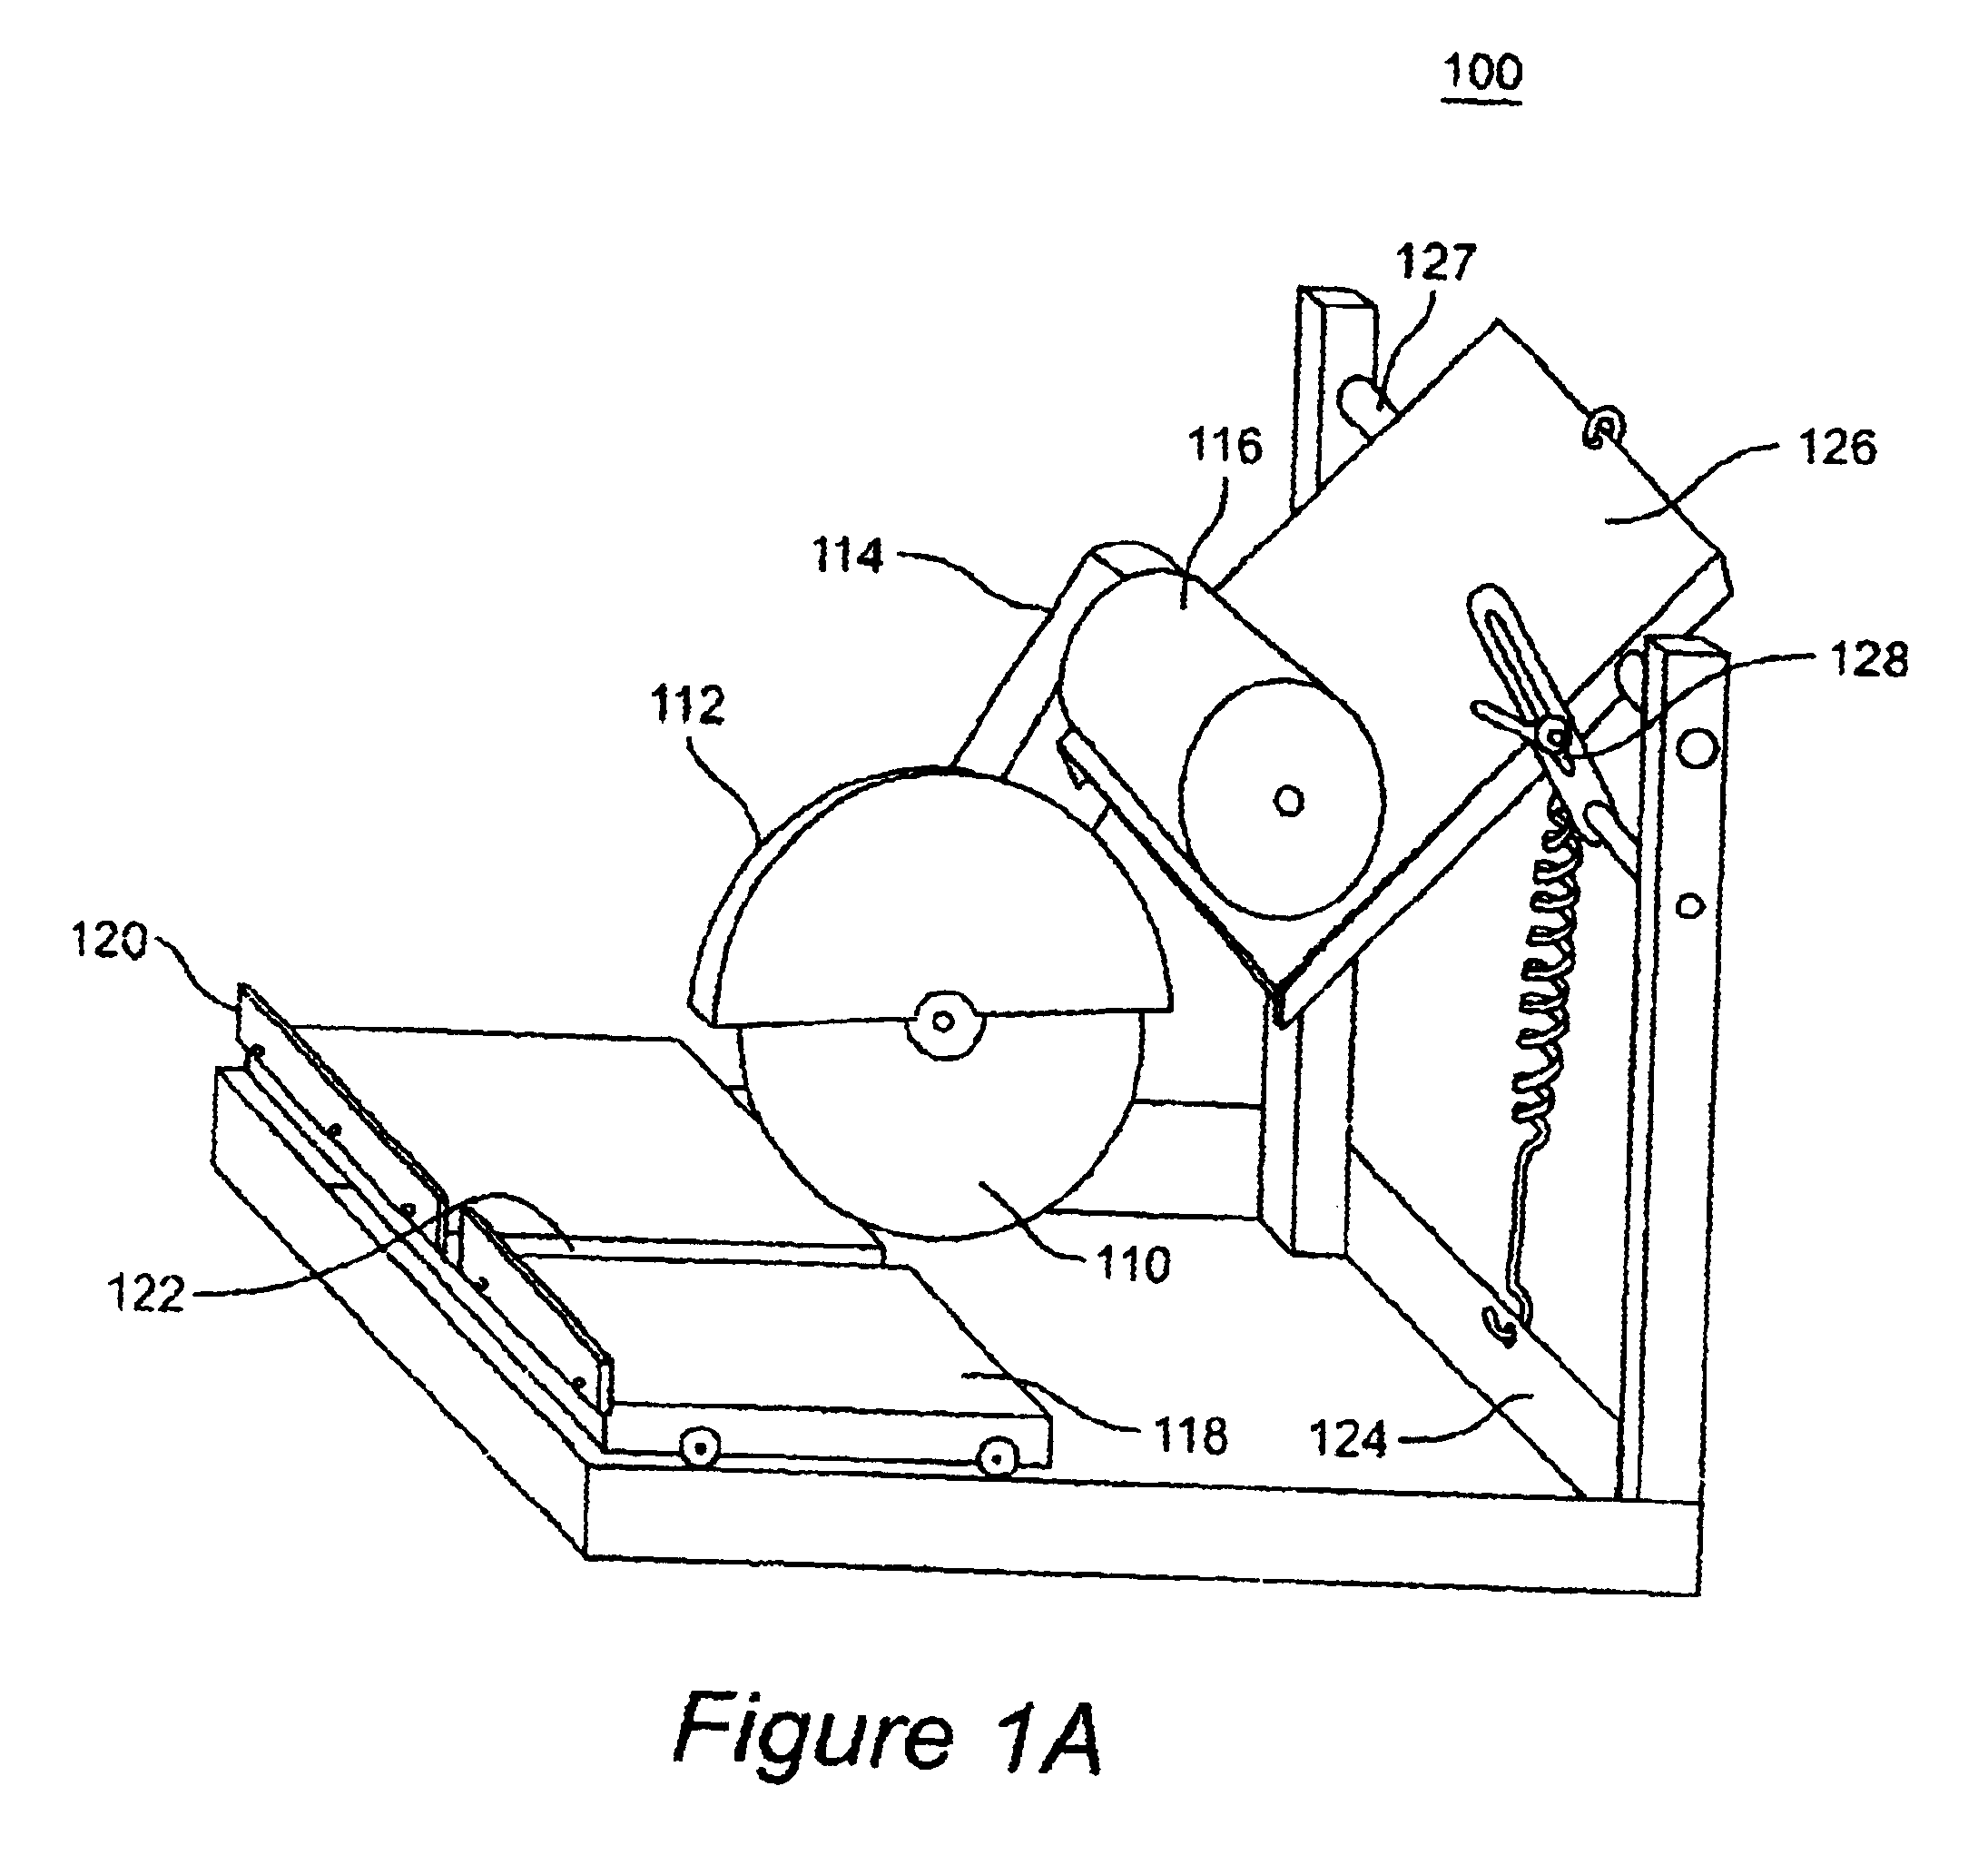 Method for manufacturing non-seamed stone corners for veneer stone surfaces